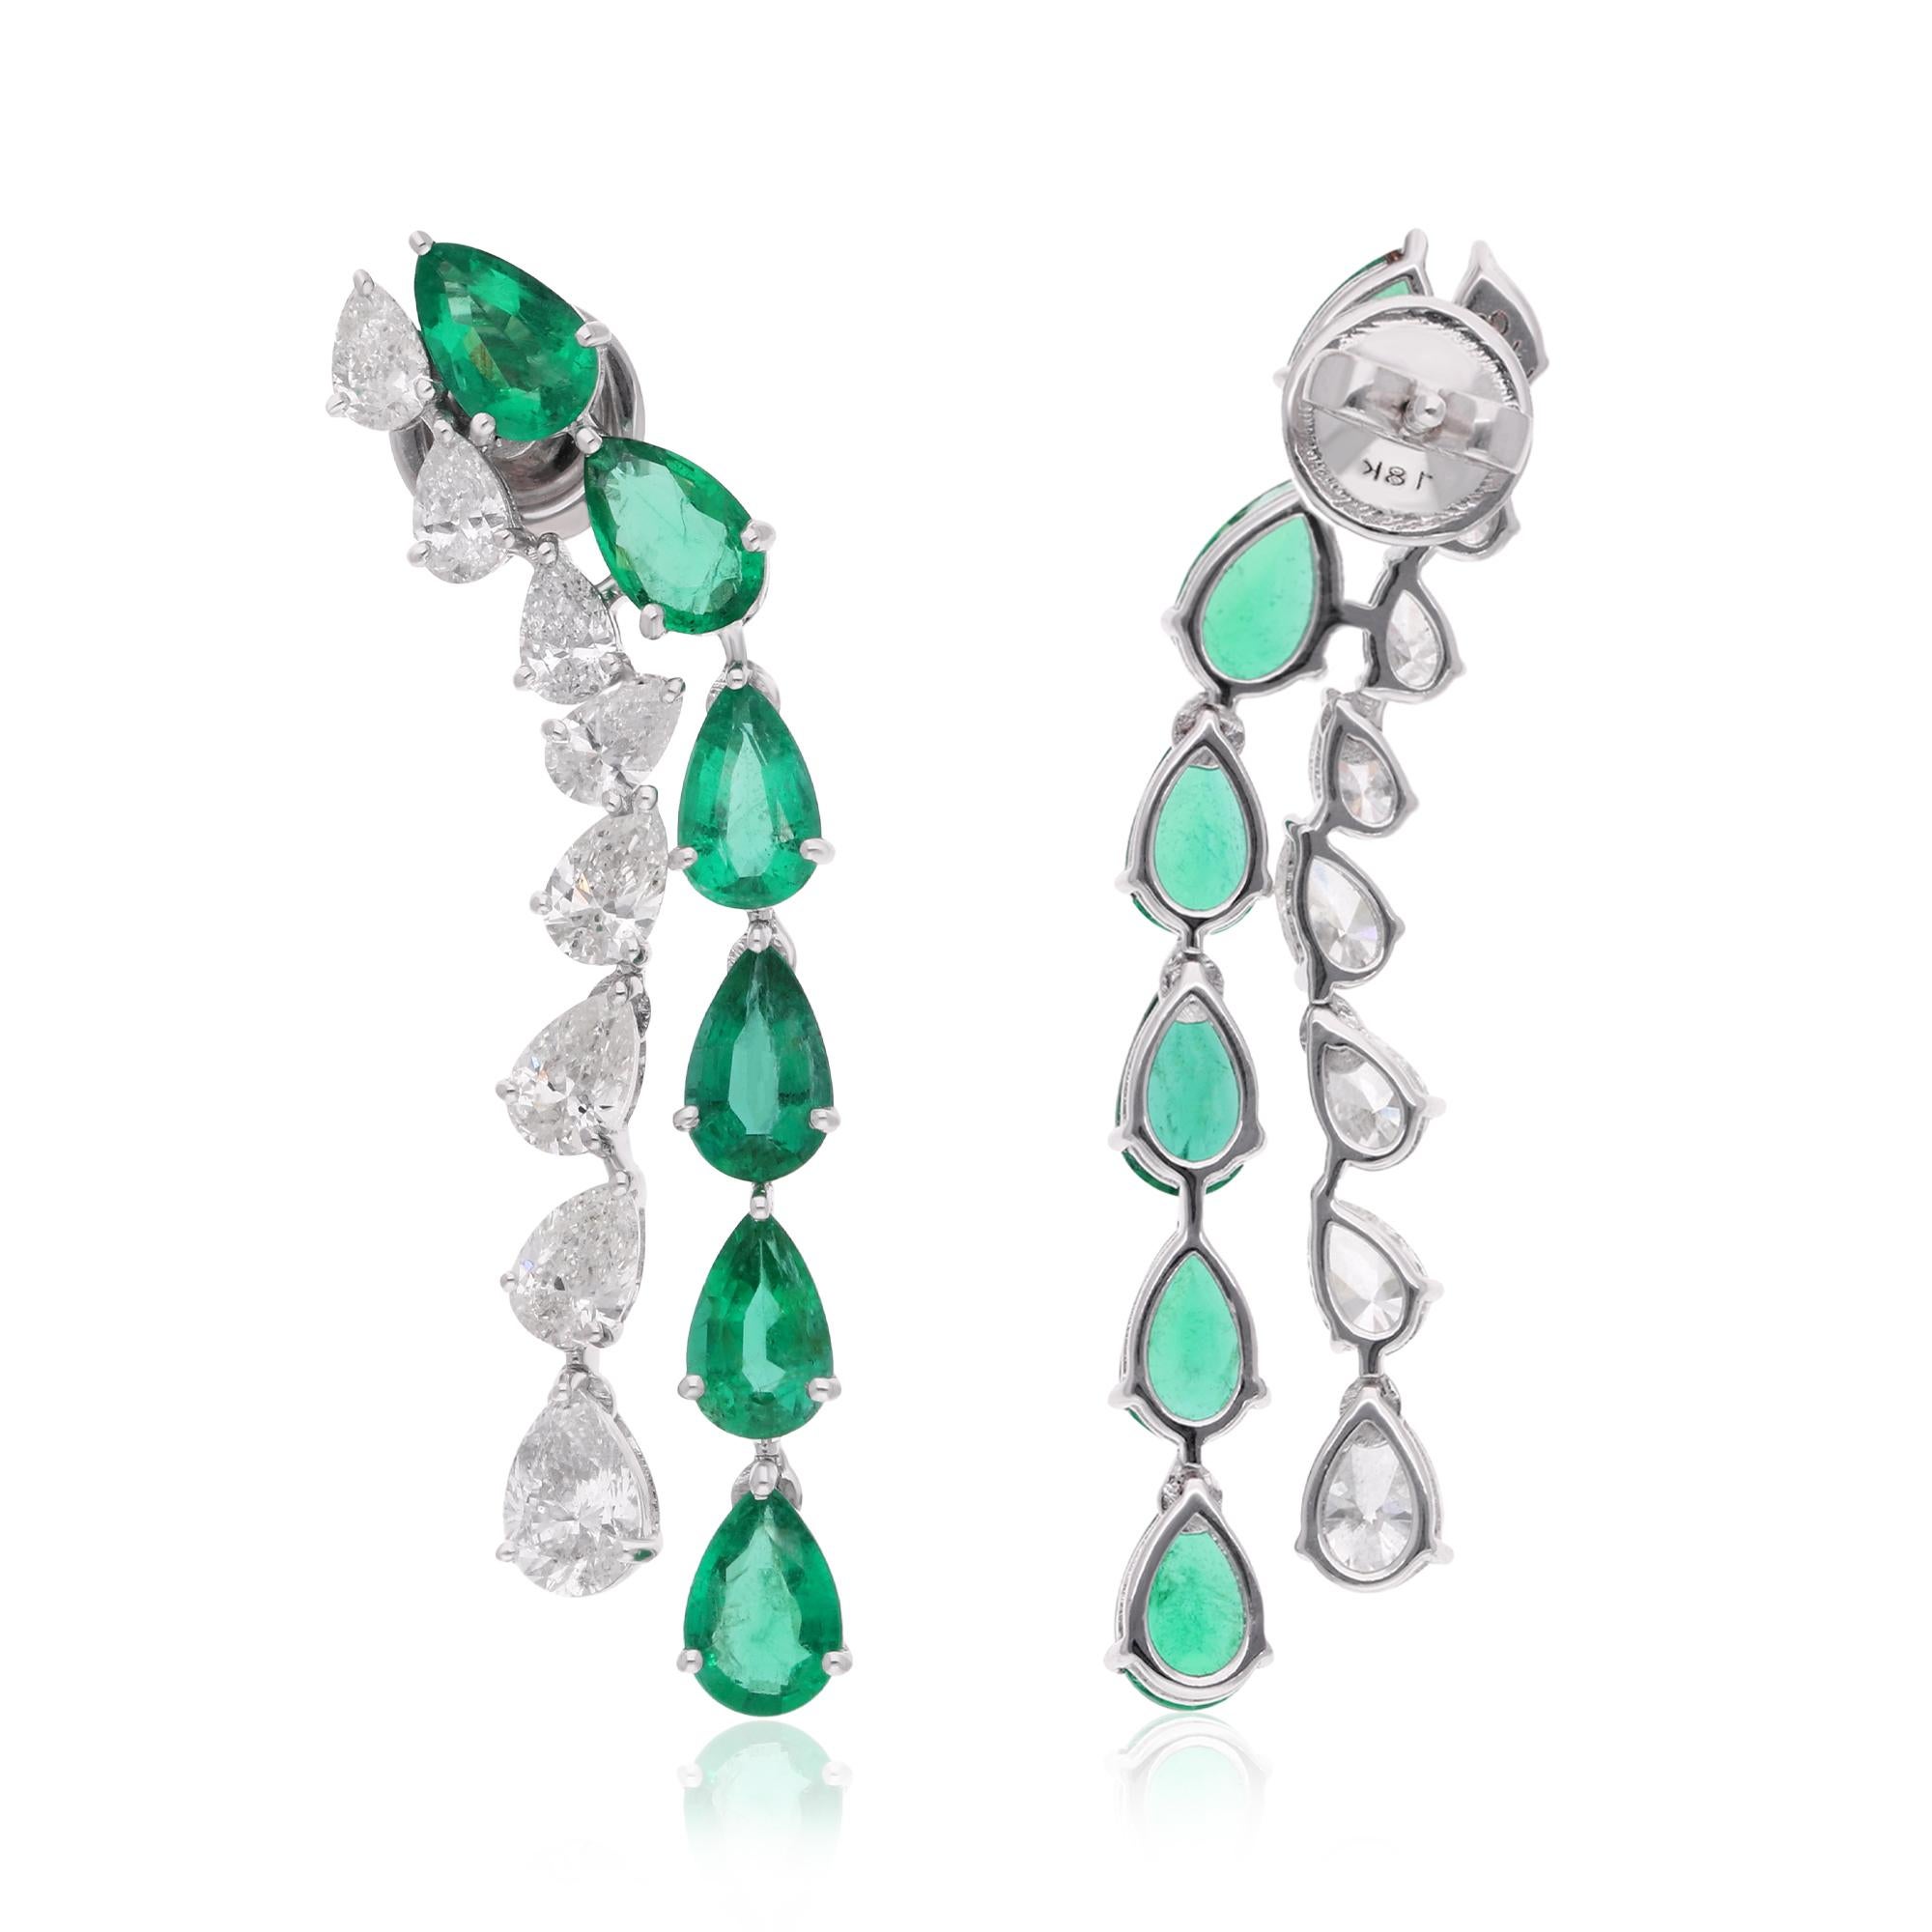 The classic pear shape of the emeralds is complemented by the timeless elegance of the white gold setting, creating a harmonious union of sophistication and grace. Whether worn for a special occasion or as a cherished everyday accessory, these